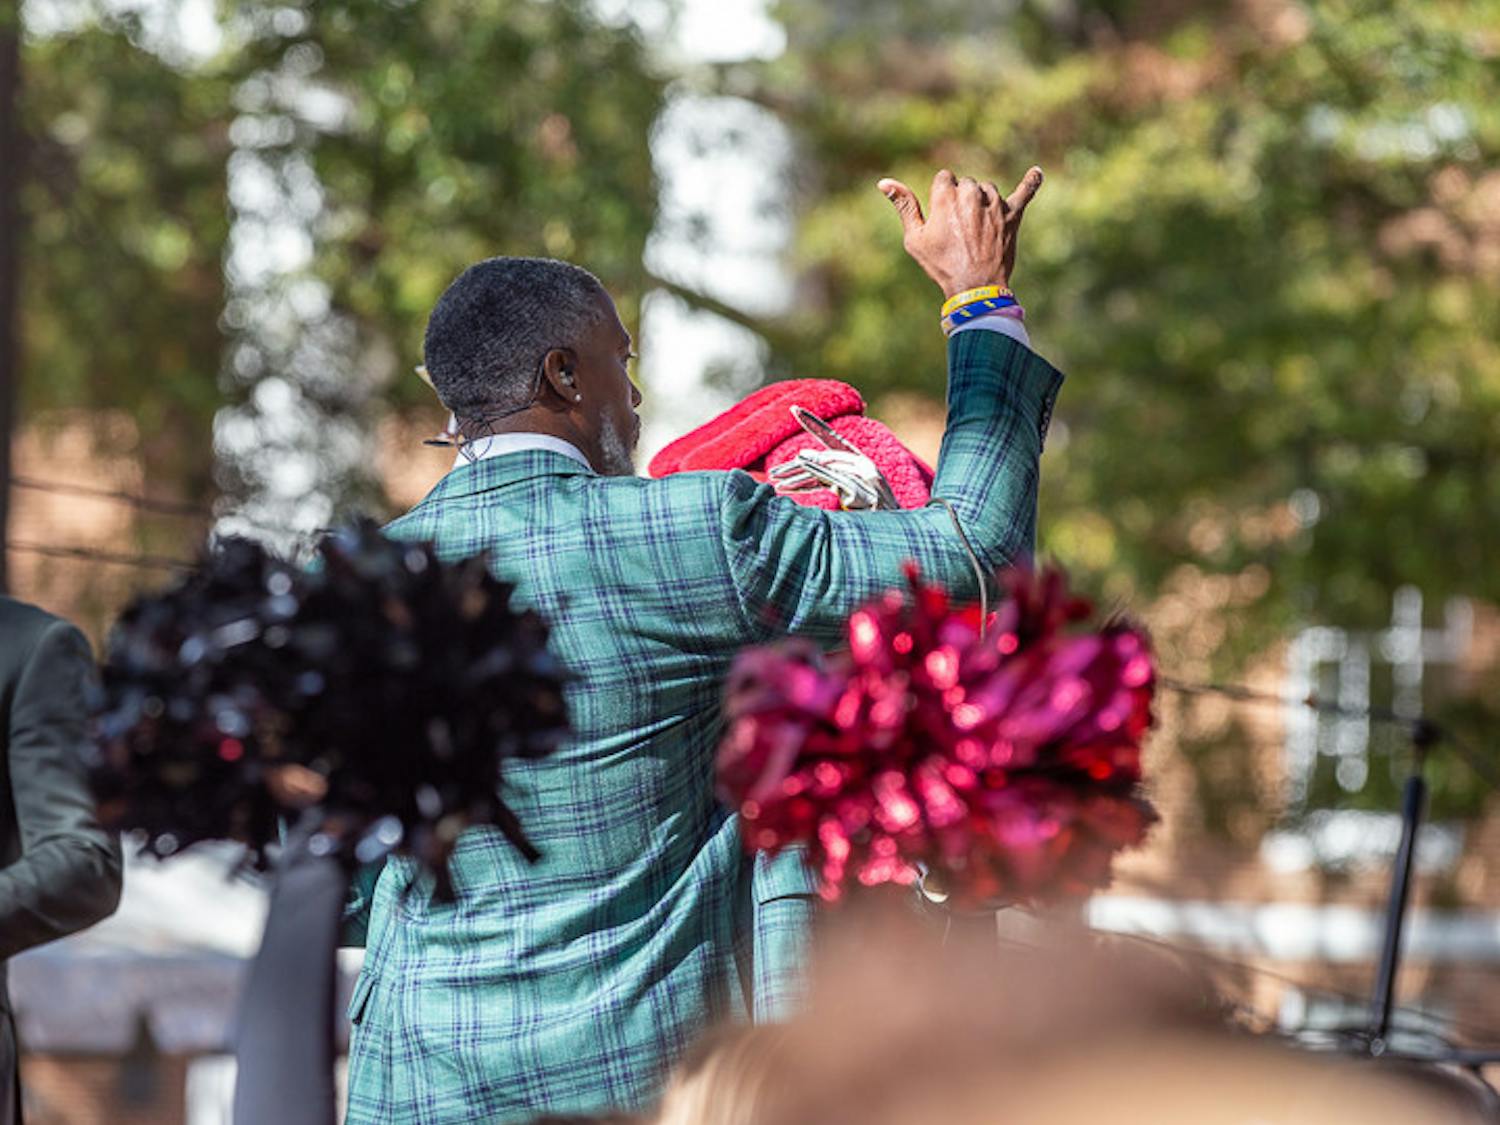 Roman Harper gives a Spurs Up signal at the end of the SEC Nation morning show on Nov. 19, 2022. Harper played safety for Alabama and the New Orleans Saints.